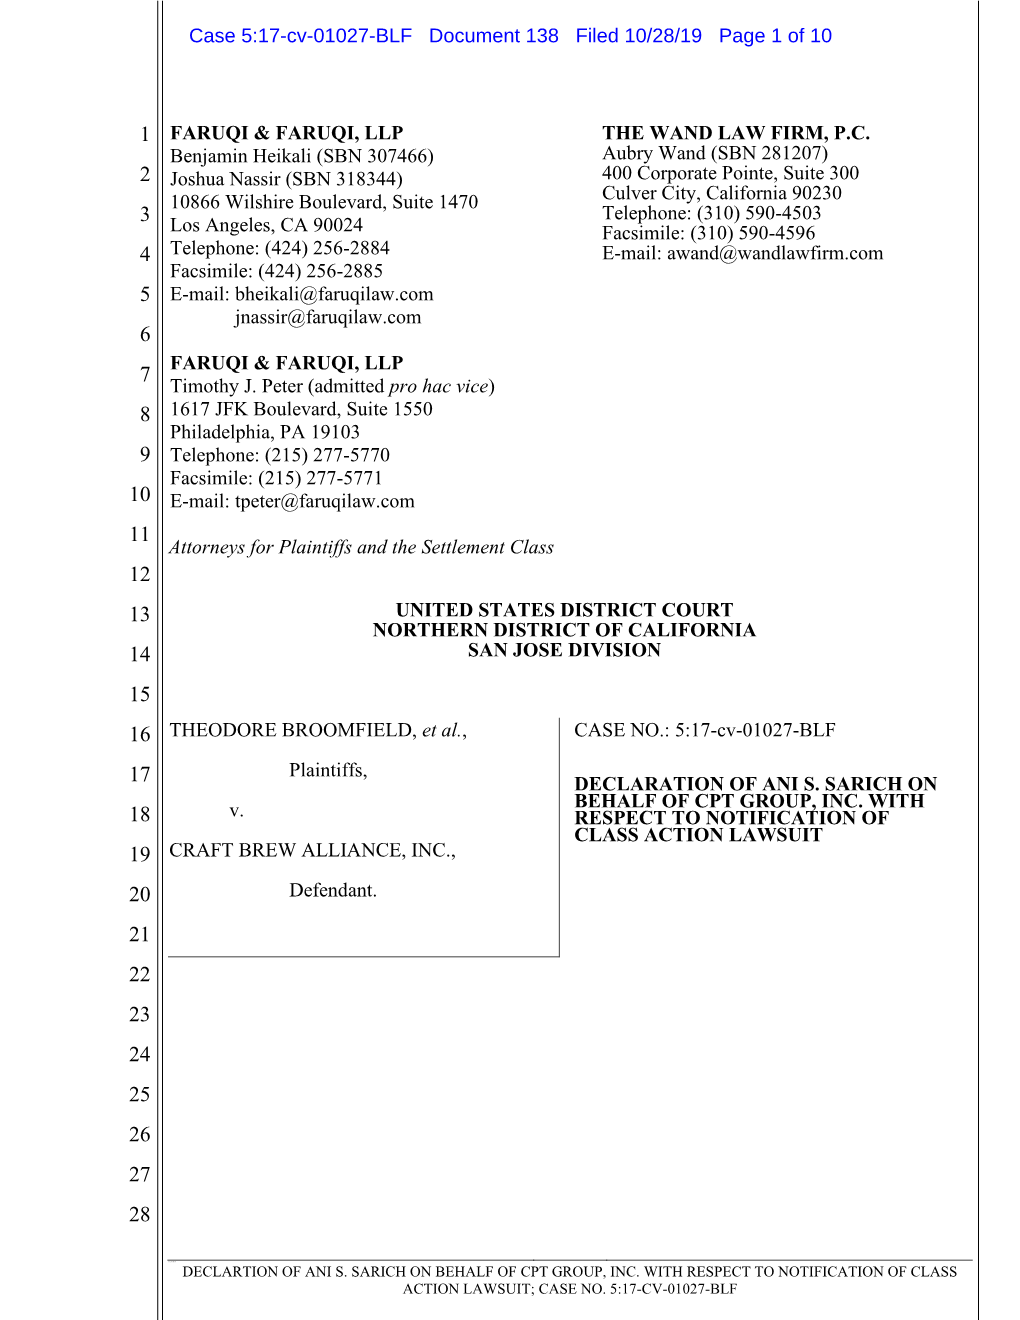 Case 5:17-Cv-01027-BLF Document 138 Filed 10/28/19 Page 1 of 10